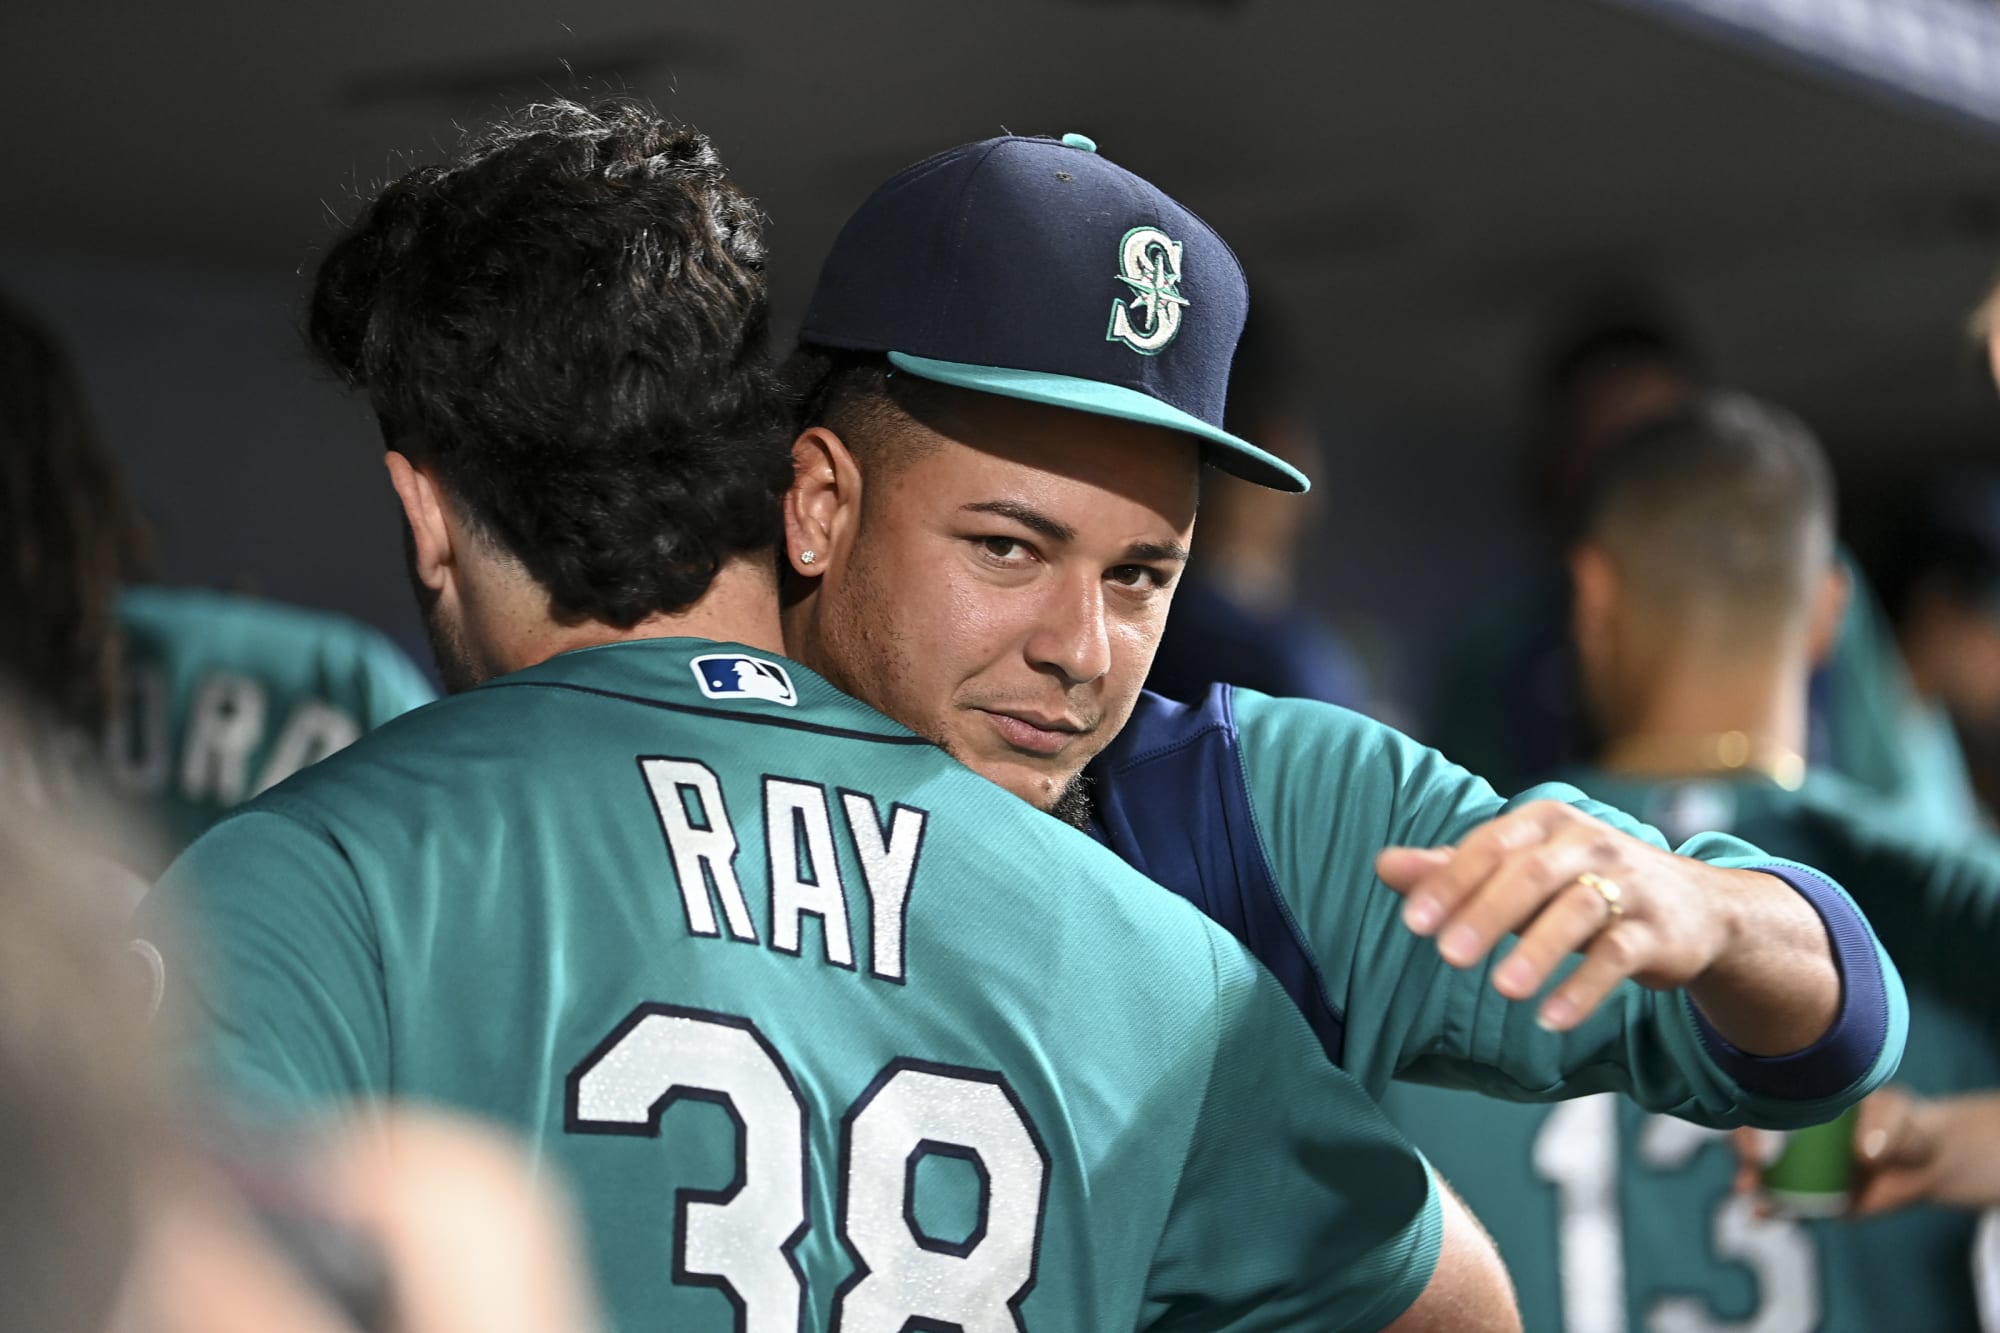 Mariners vs Rangers Preview: Starting the final homestand in Seattle